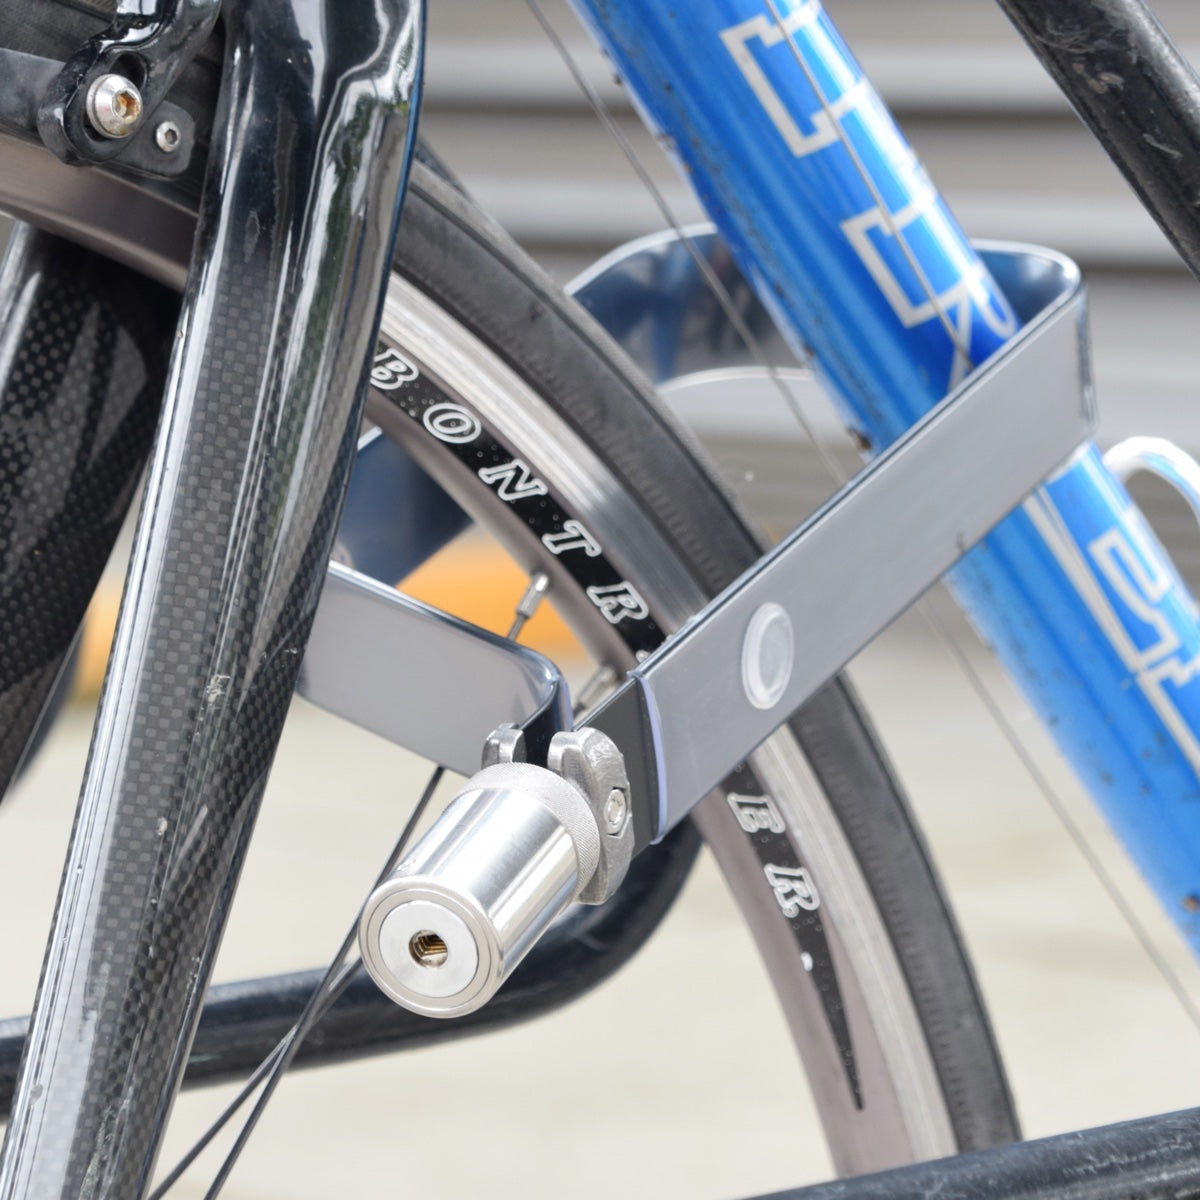 TiGr BLUE mini+  high carbon blue steel u-lock: strong, lightweight, certified bicycle security by TiGr Lock